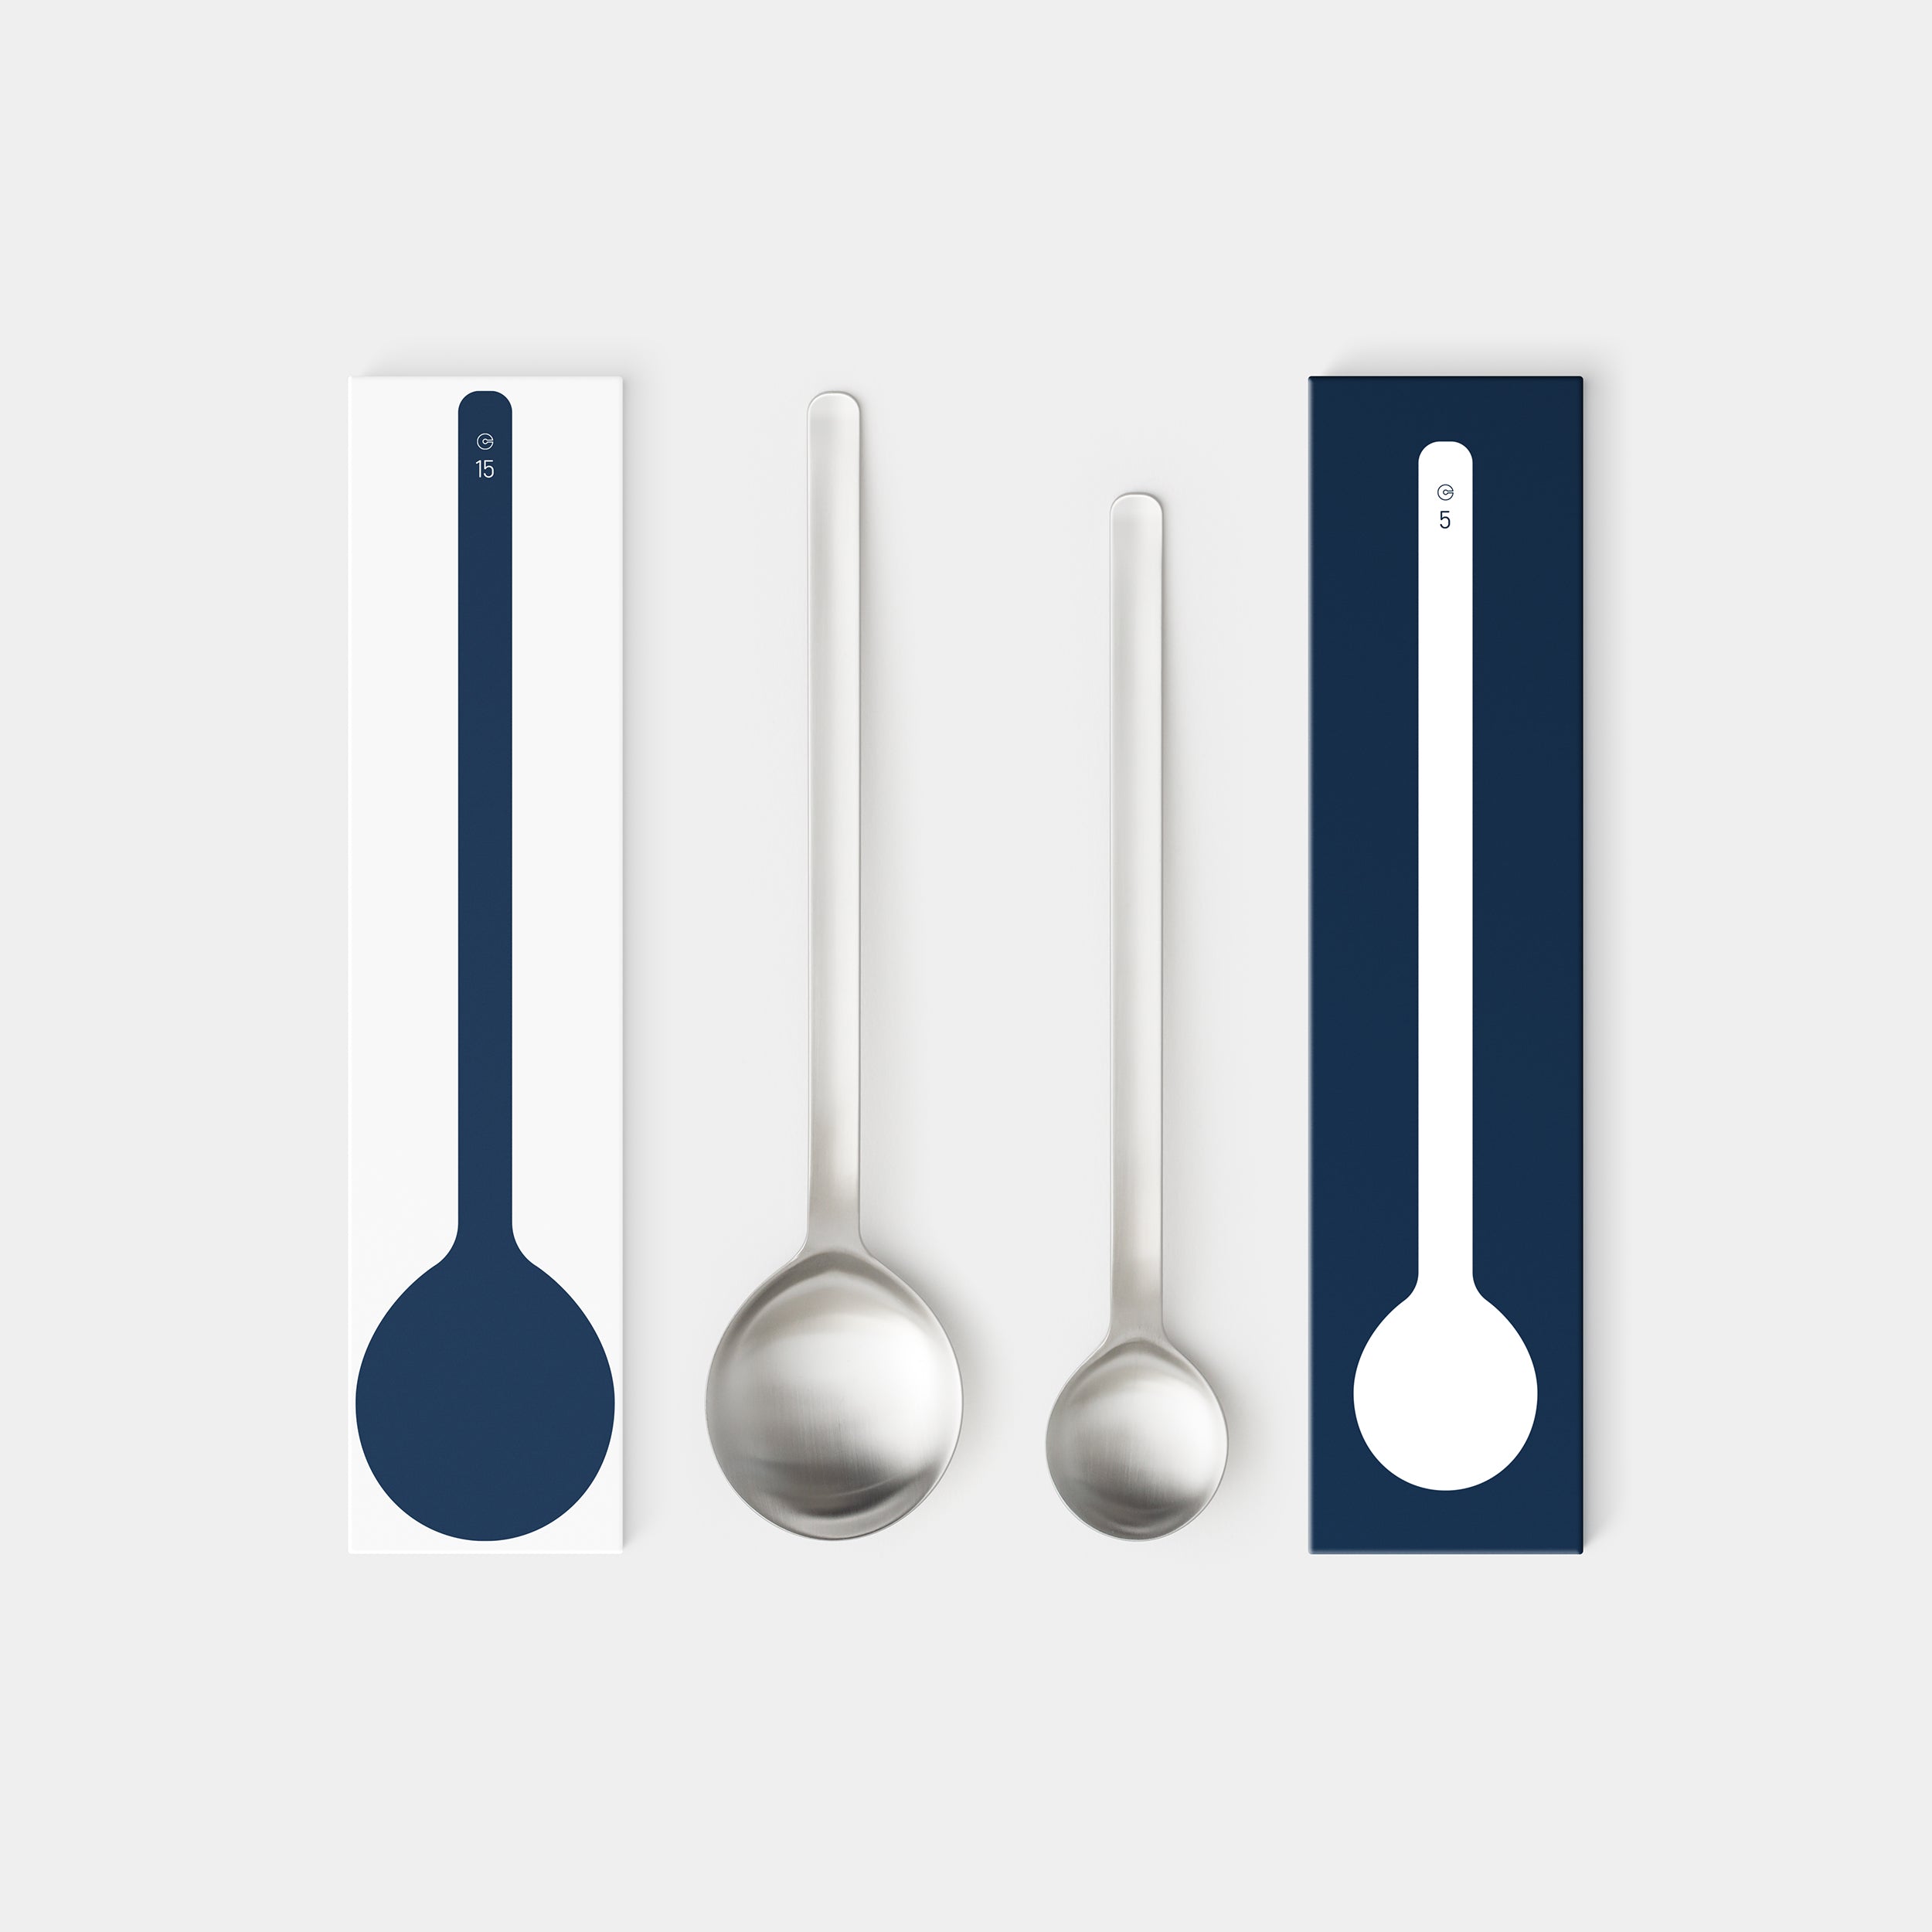 Yakusaji Stainless Steel Measuring Spoons by conte